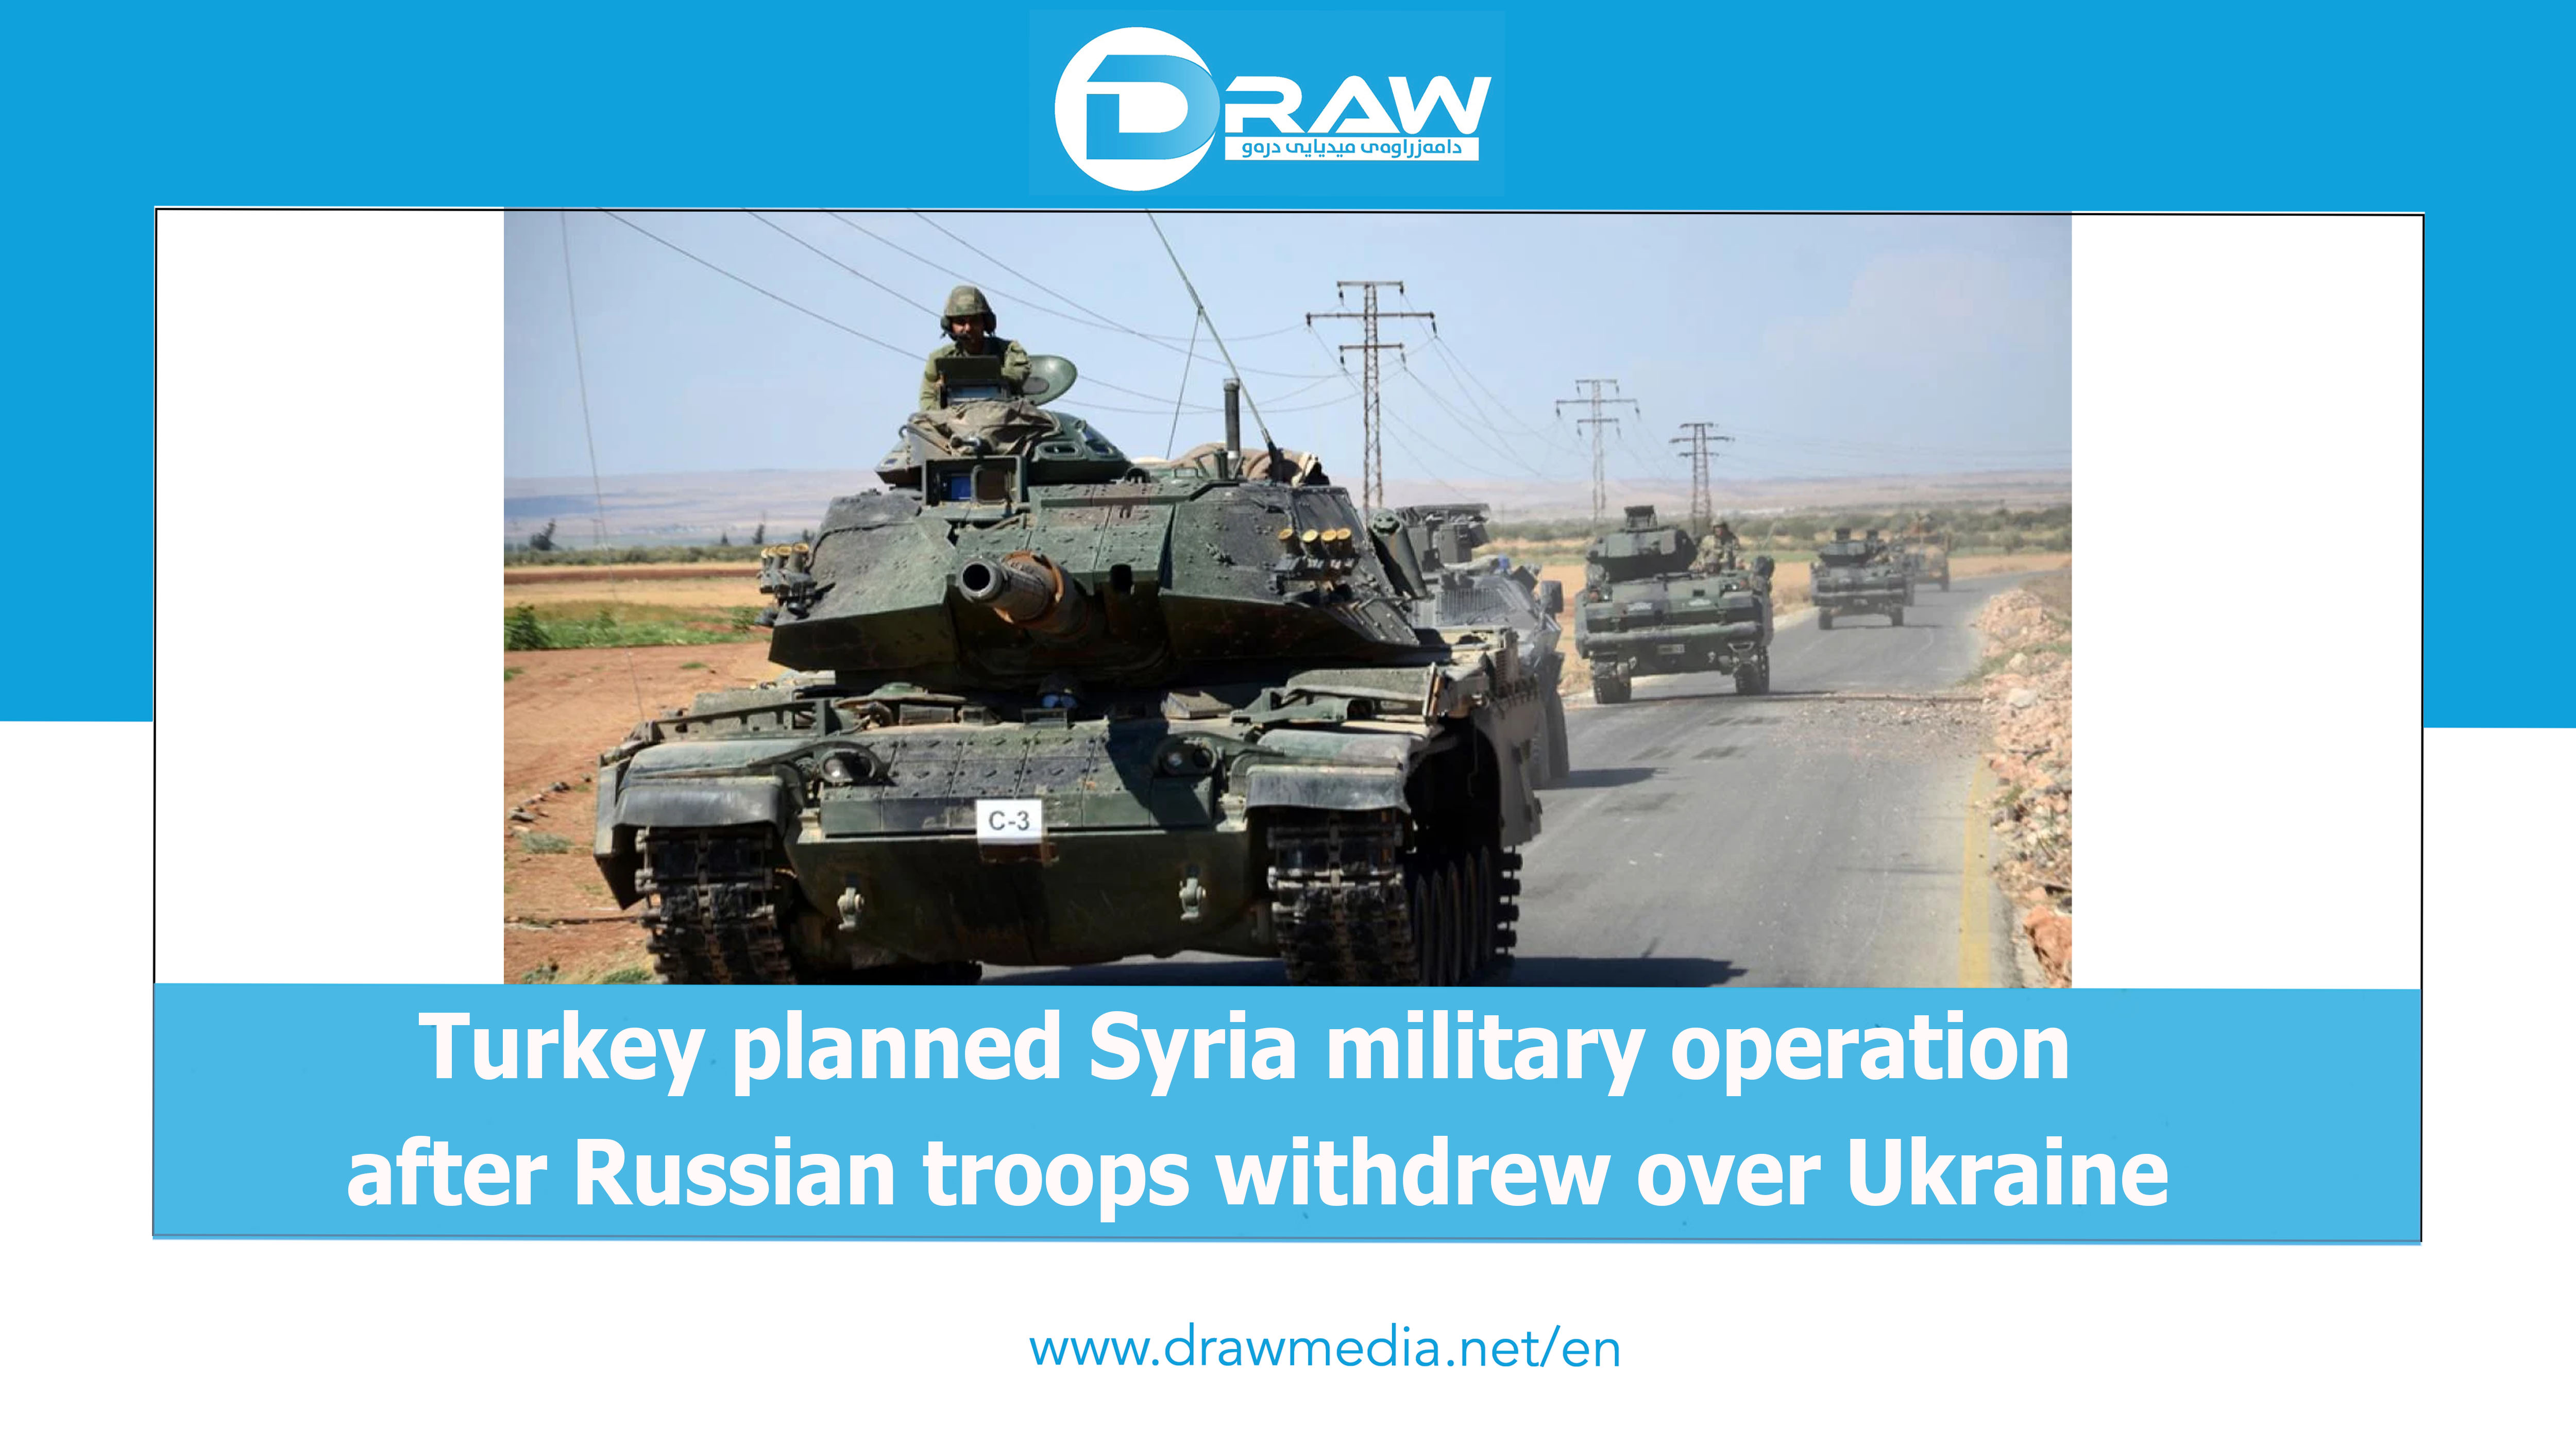 DrawMedia.net / Turkey planned Syria military operation after Russian troops withdrew over Ukraine